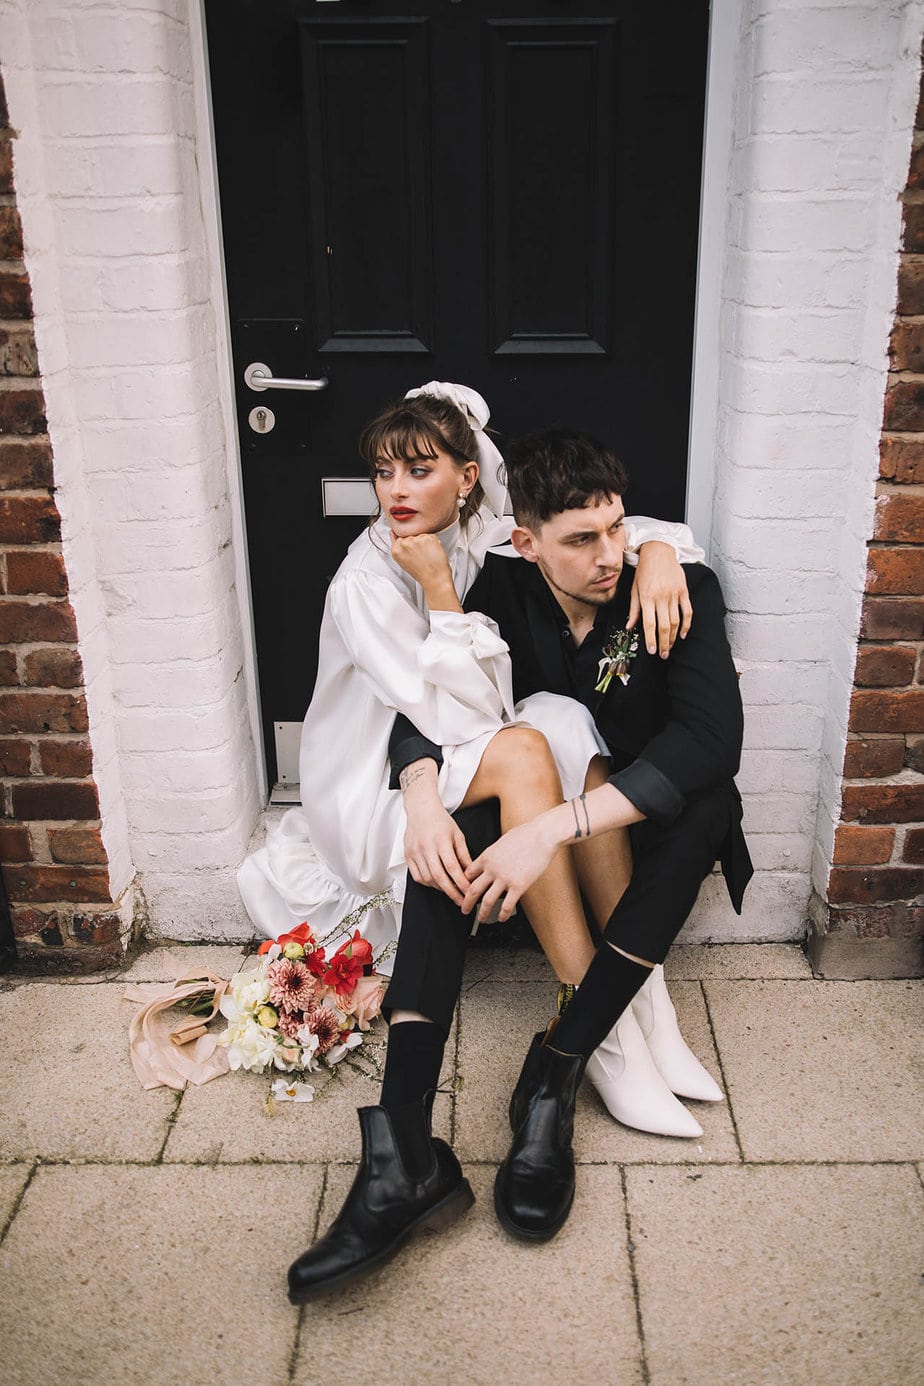 Couple sitting together on a step during their elopement day, bride wears a short white dress